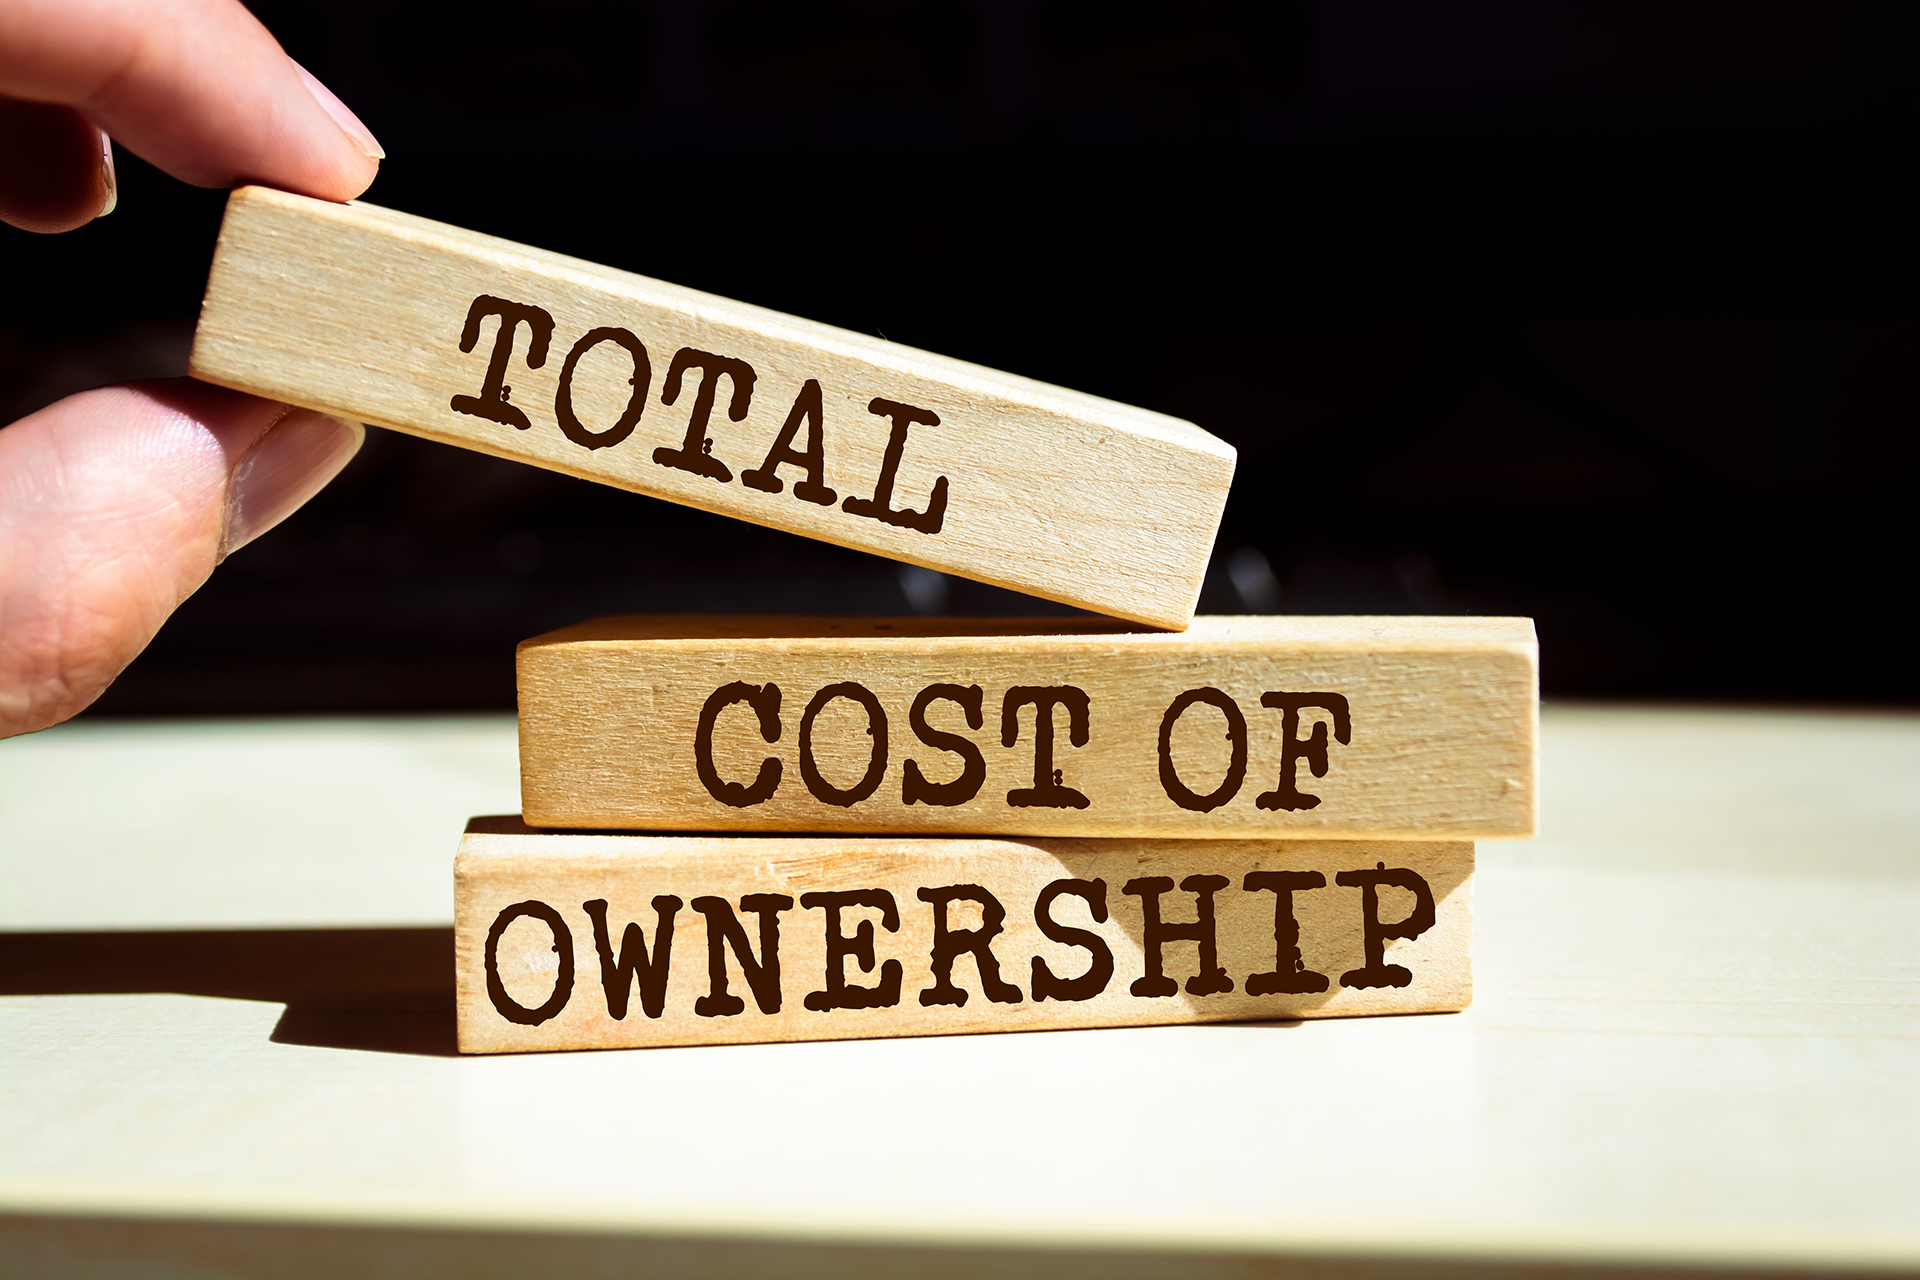 Manage consumption costs through awareness: discover the total ownership costs of your professional oven